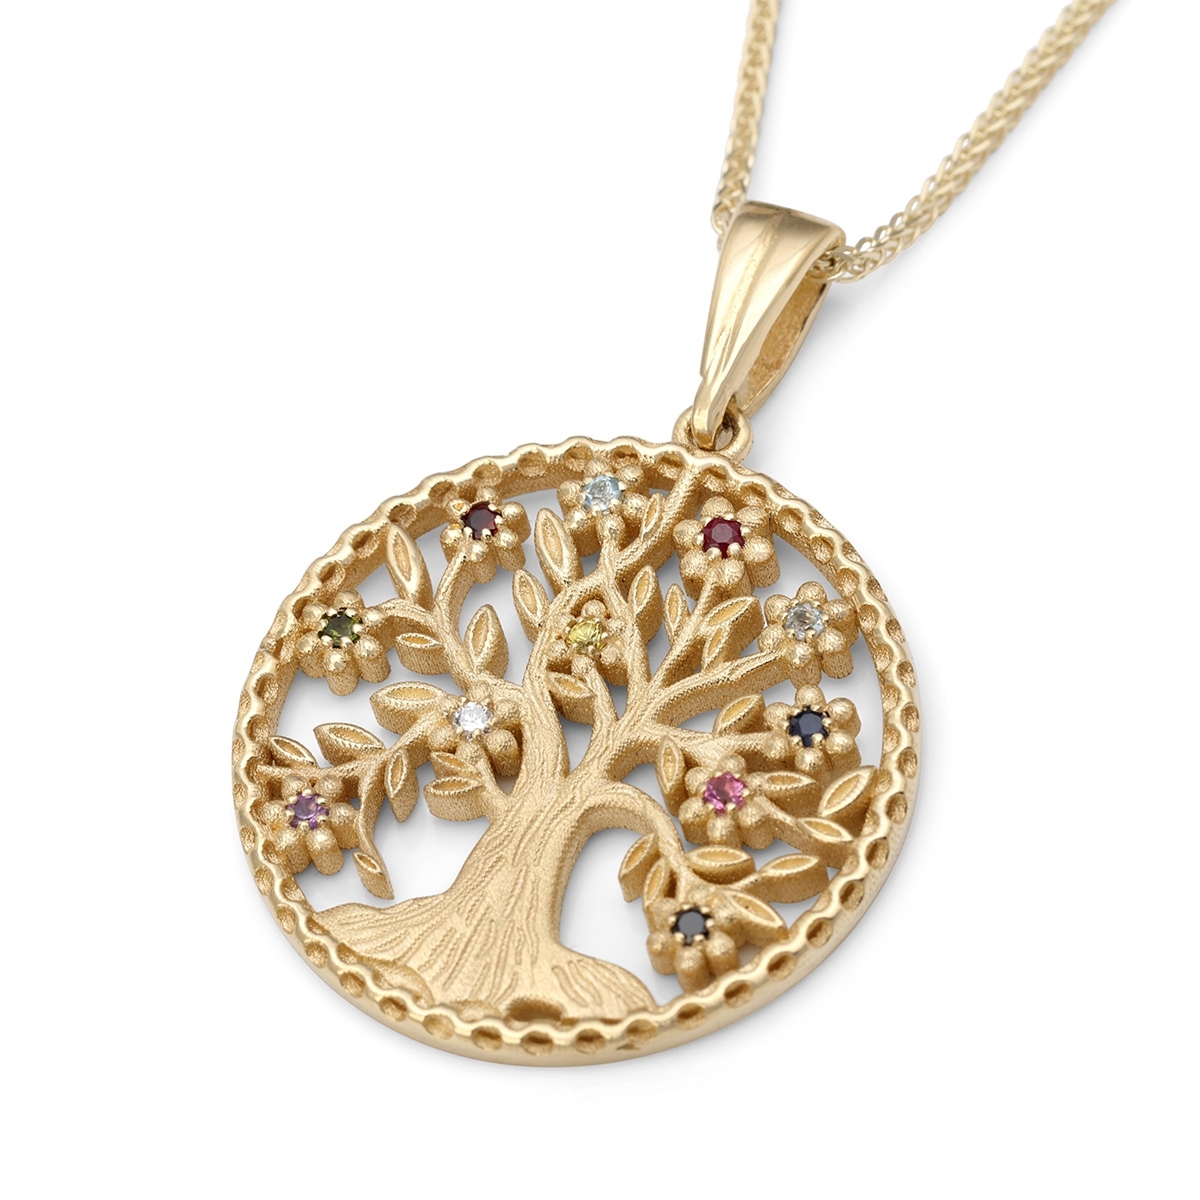 Deluxe 14K Yellow Gold Tree of Life Pendant Necklace With Colorful Gemstones - 1